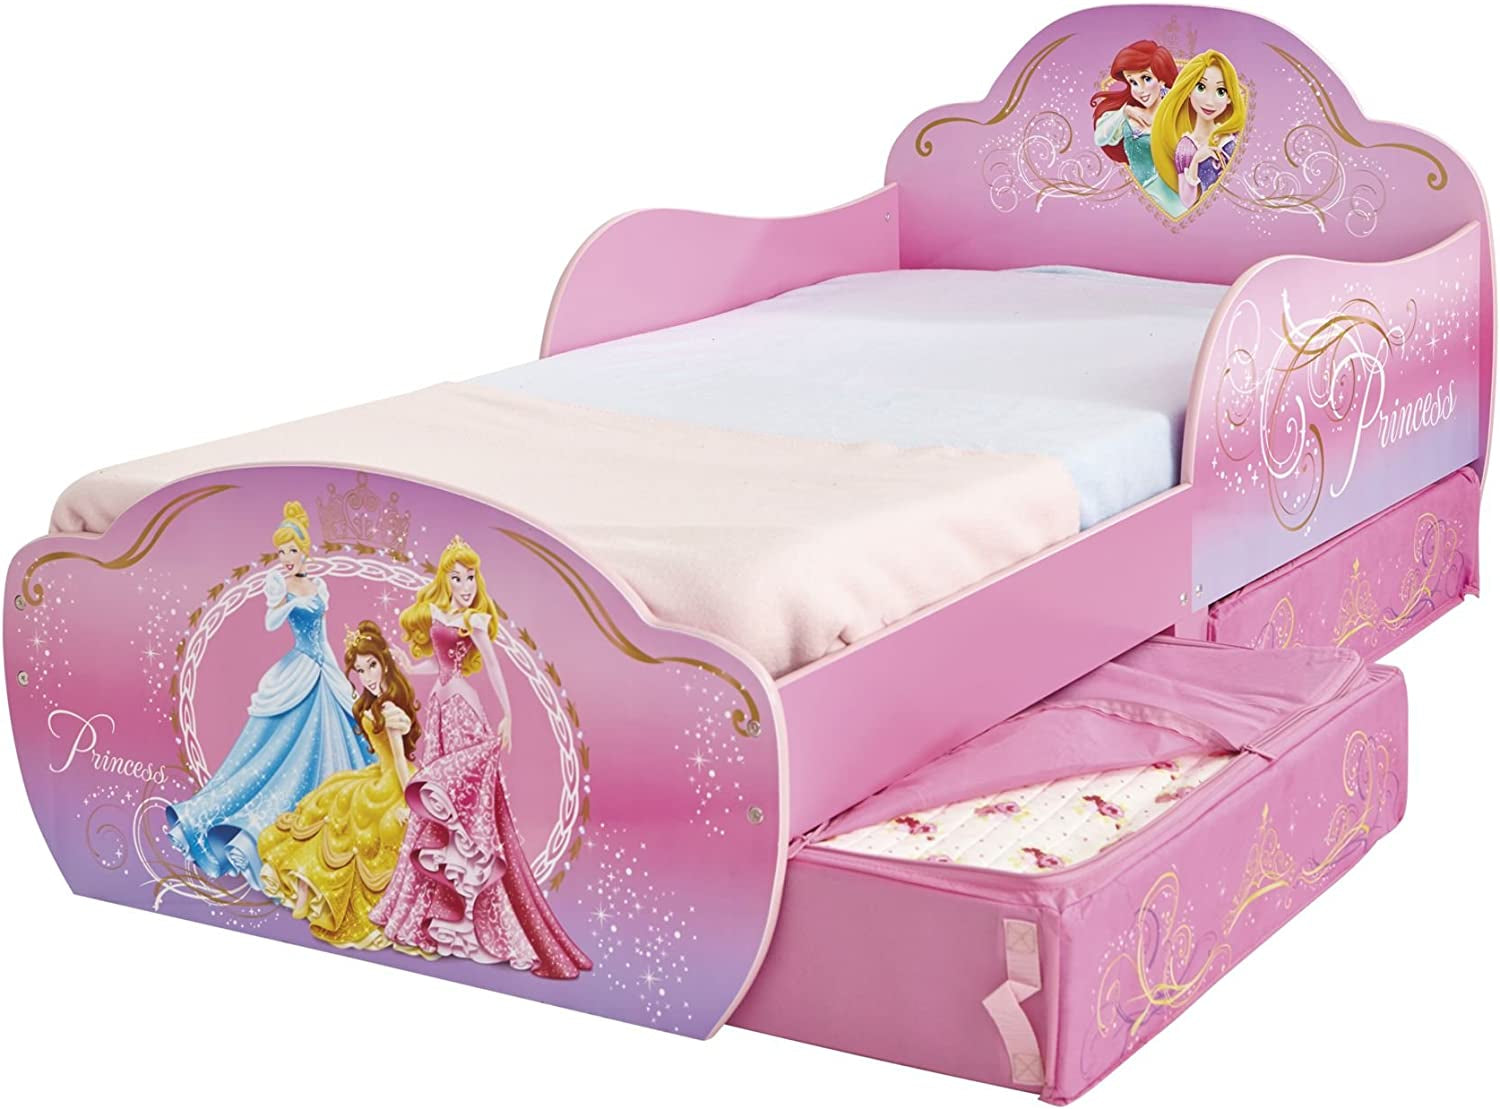 Kids Toddler Bed with Underbed Storage by Hellohome, Pink, 143.00X77.00X63.00 Cm